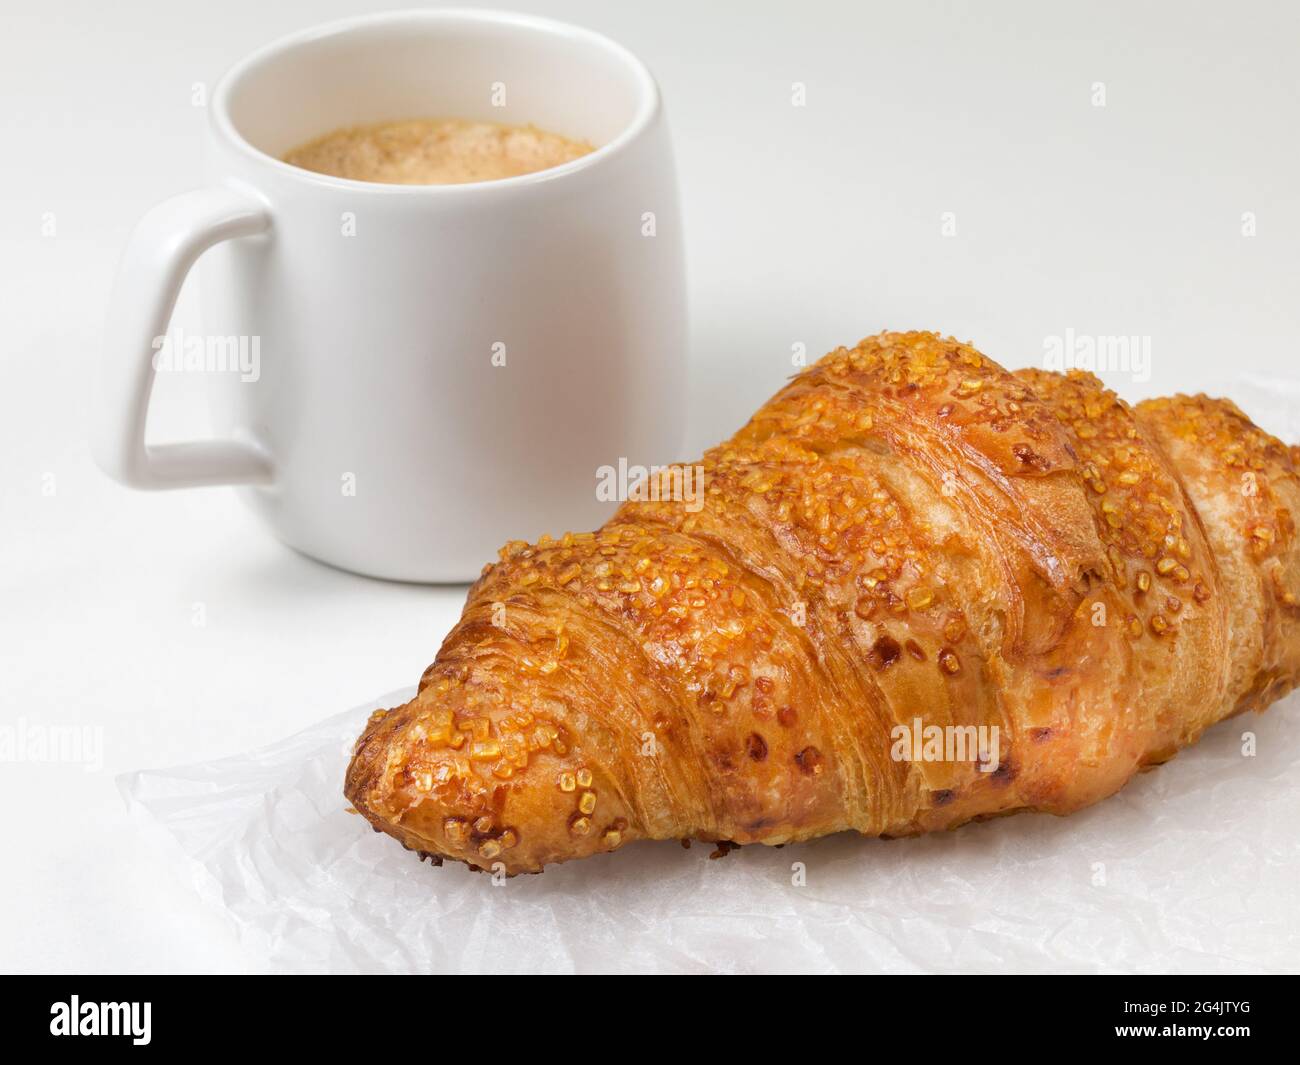 pastry croissant on white paper background with cup of coffee. French food Stock Photo